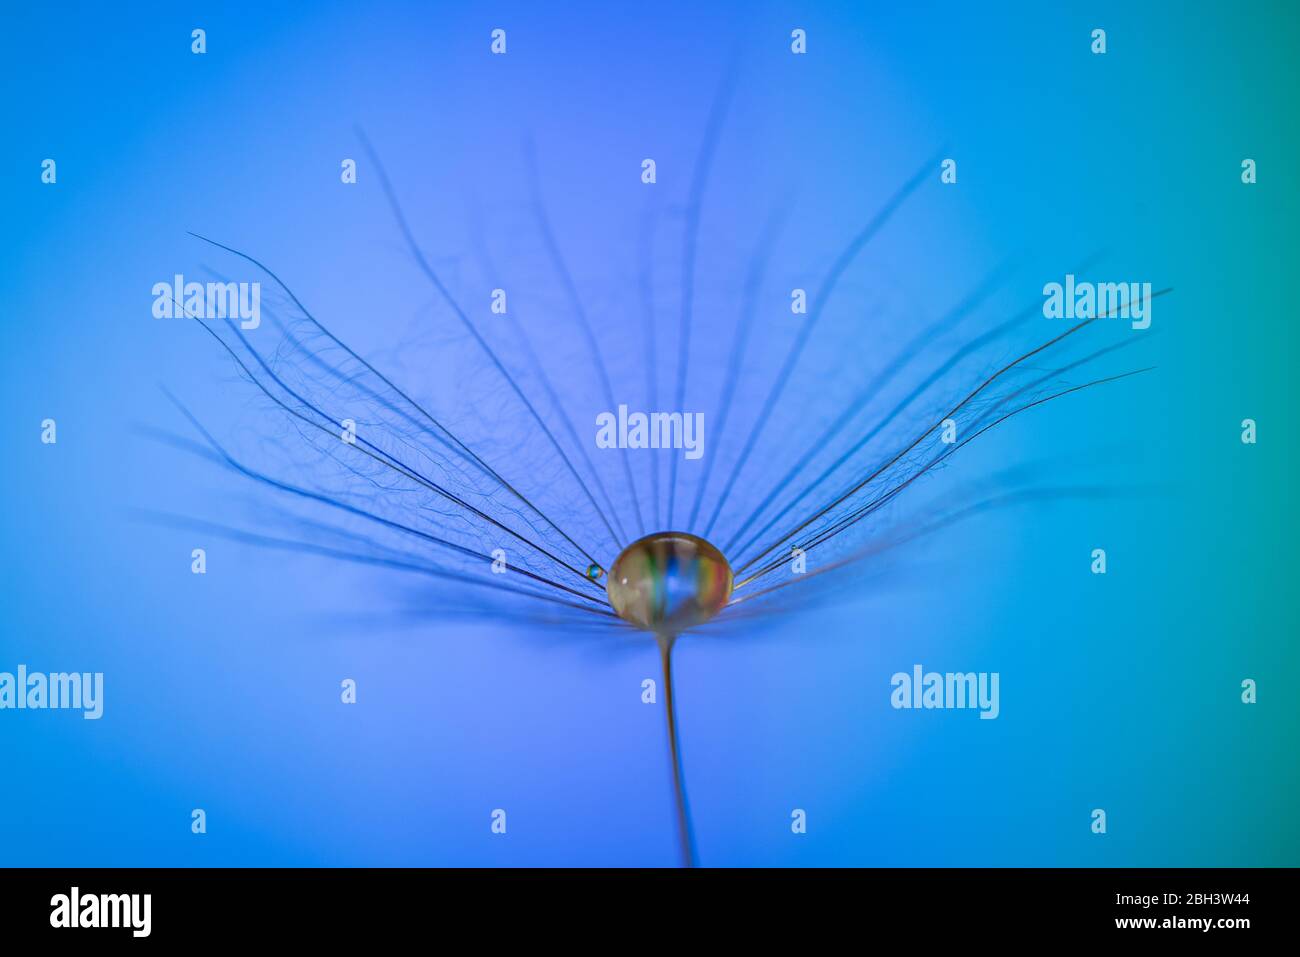 Dandelion, taraxacum, seeds with raindrops against a bright blue background in a studio. Macro, Selective focus. Stock Photo